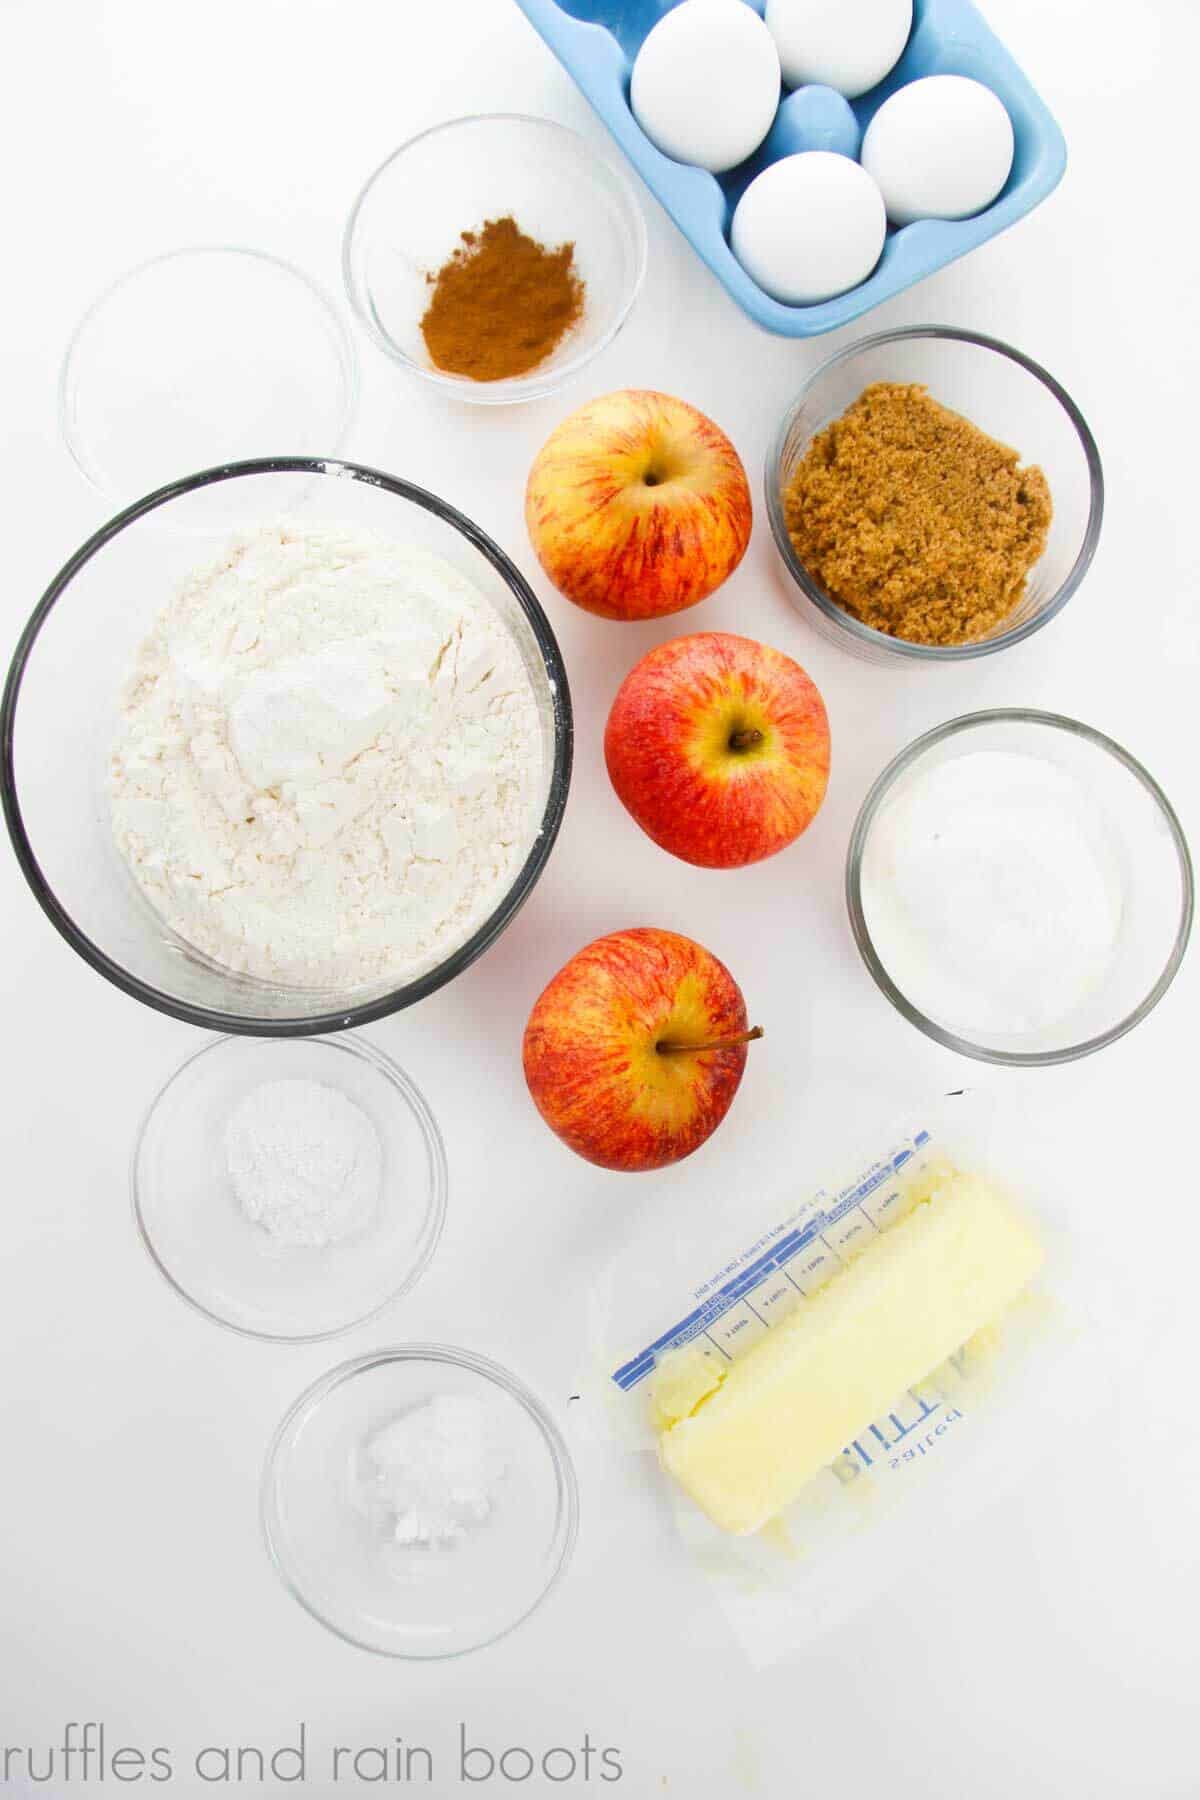 Ingredients needed for a fall muffin recipe with apples, cinnamon, and a crumb topping.